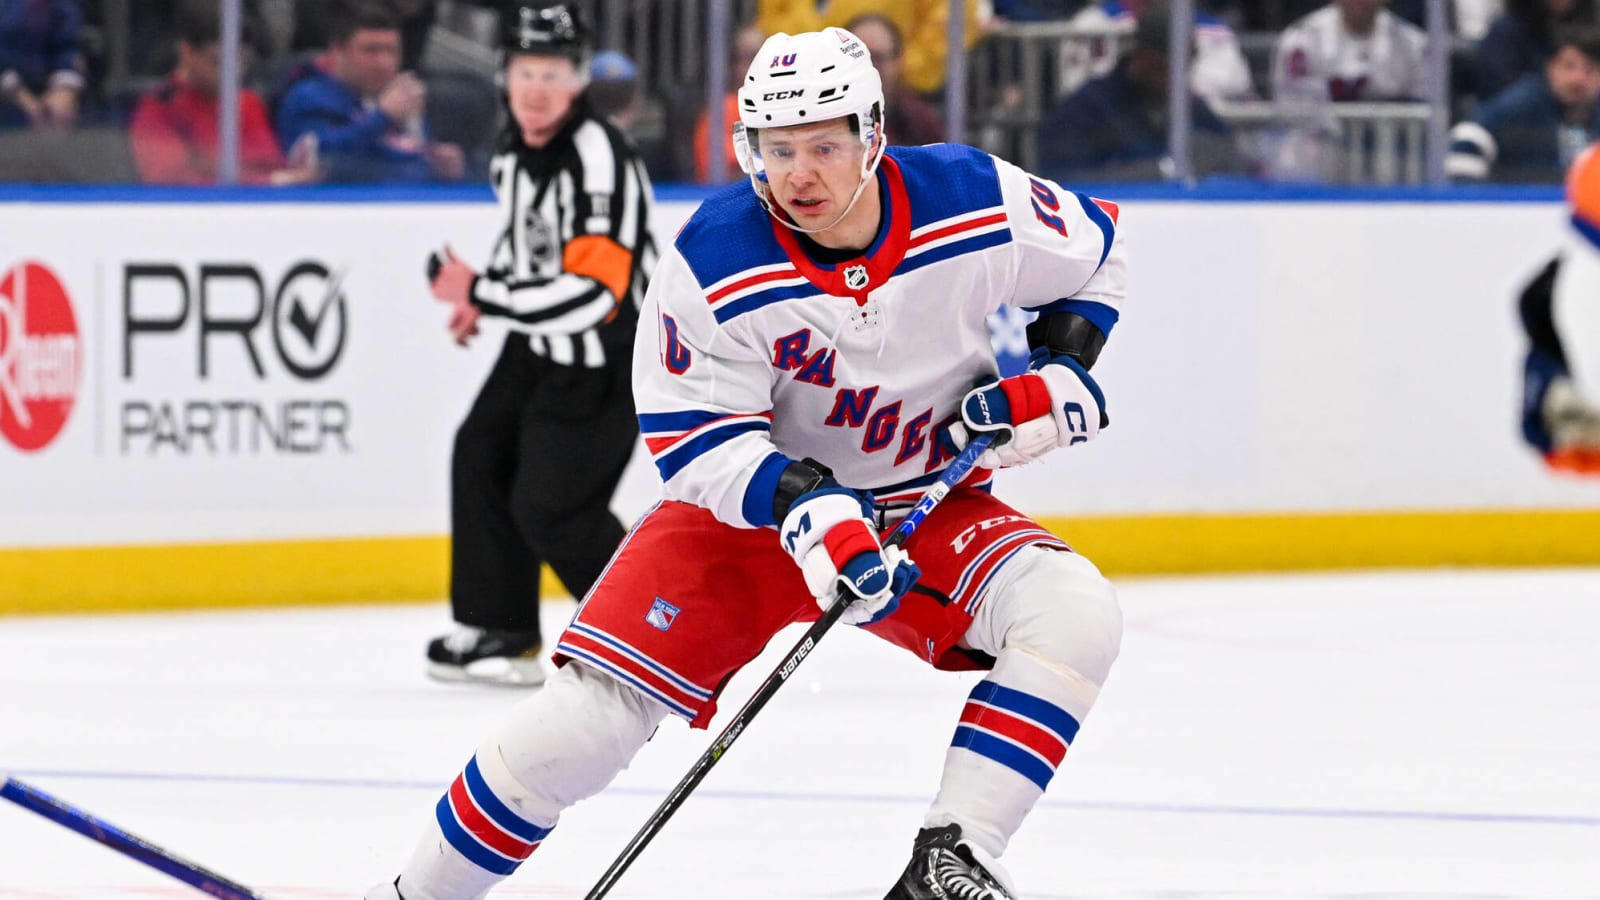 Rangers’ Panarin Not Getting Enough Hart Trophy Consideration